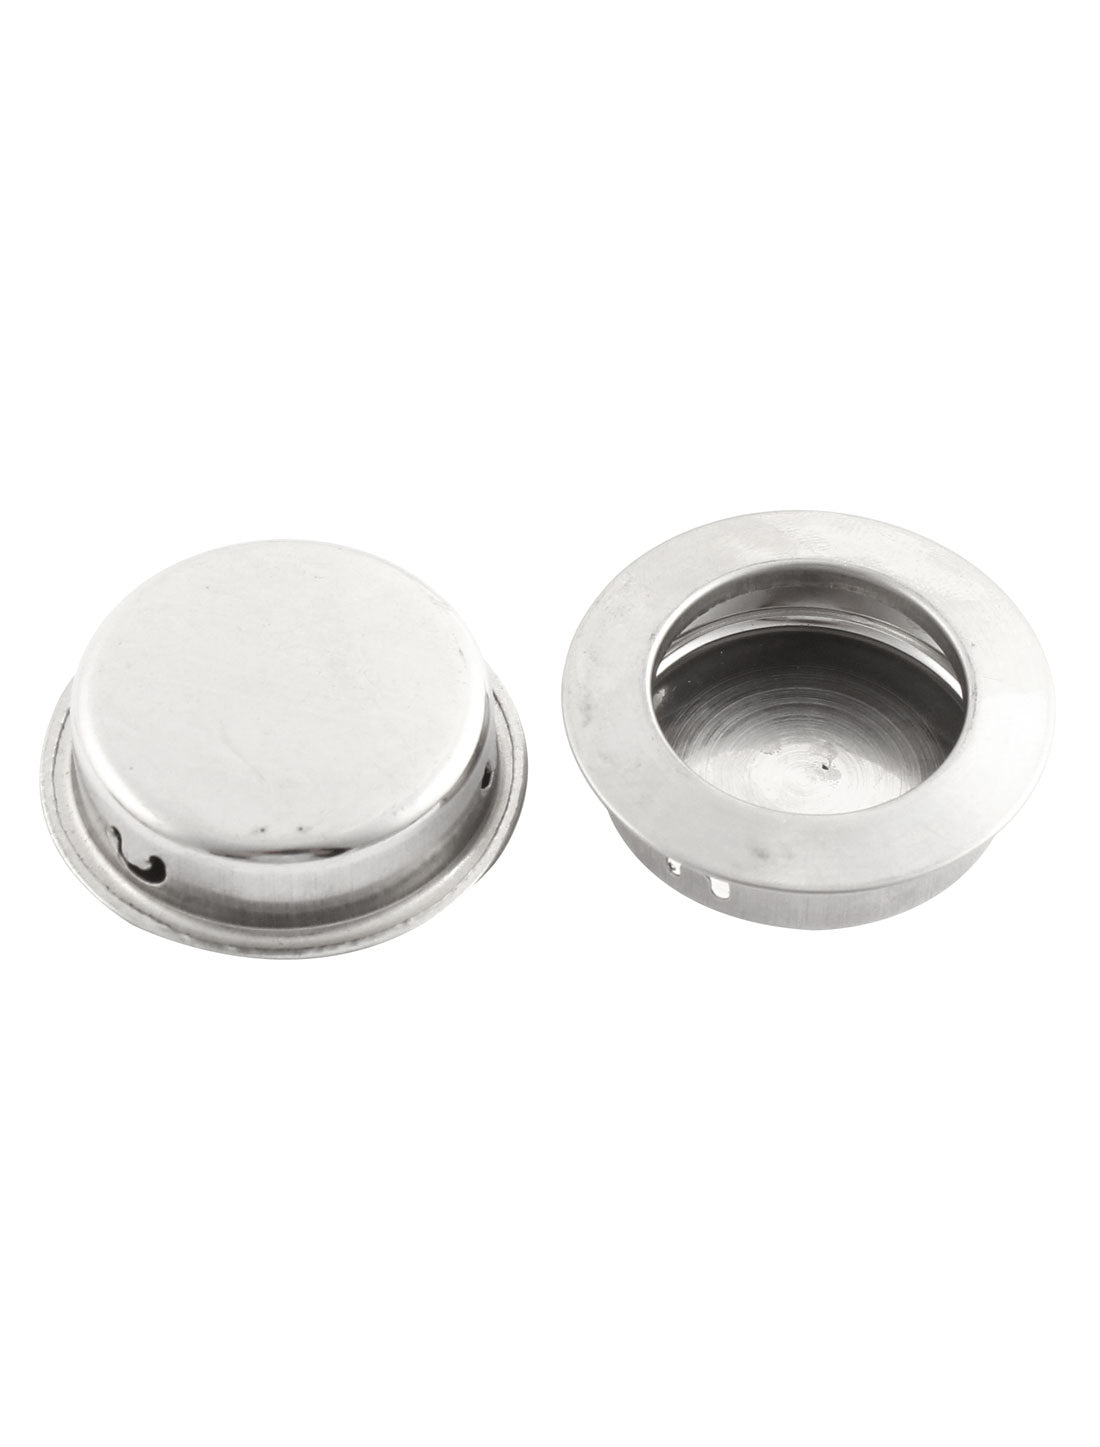 uxcell Uxcell Sliding Door Drawer Stainless Steel 35mm Round Recessed Flush Pull Handle 7pcs